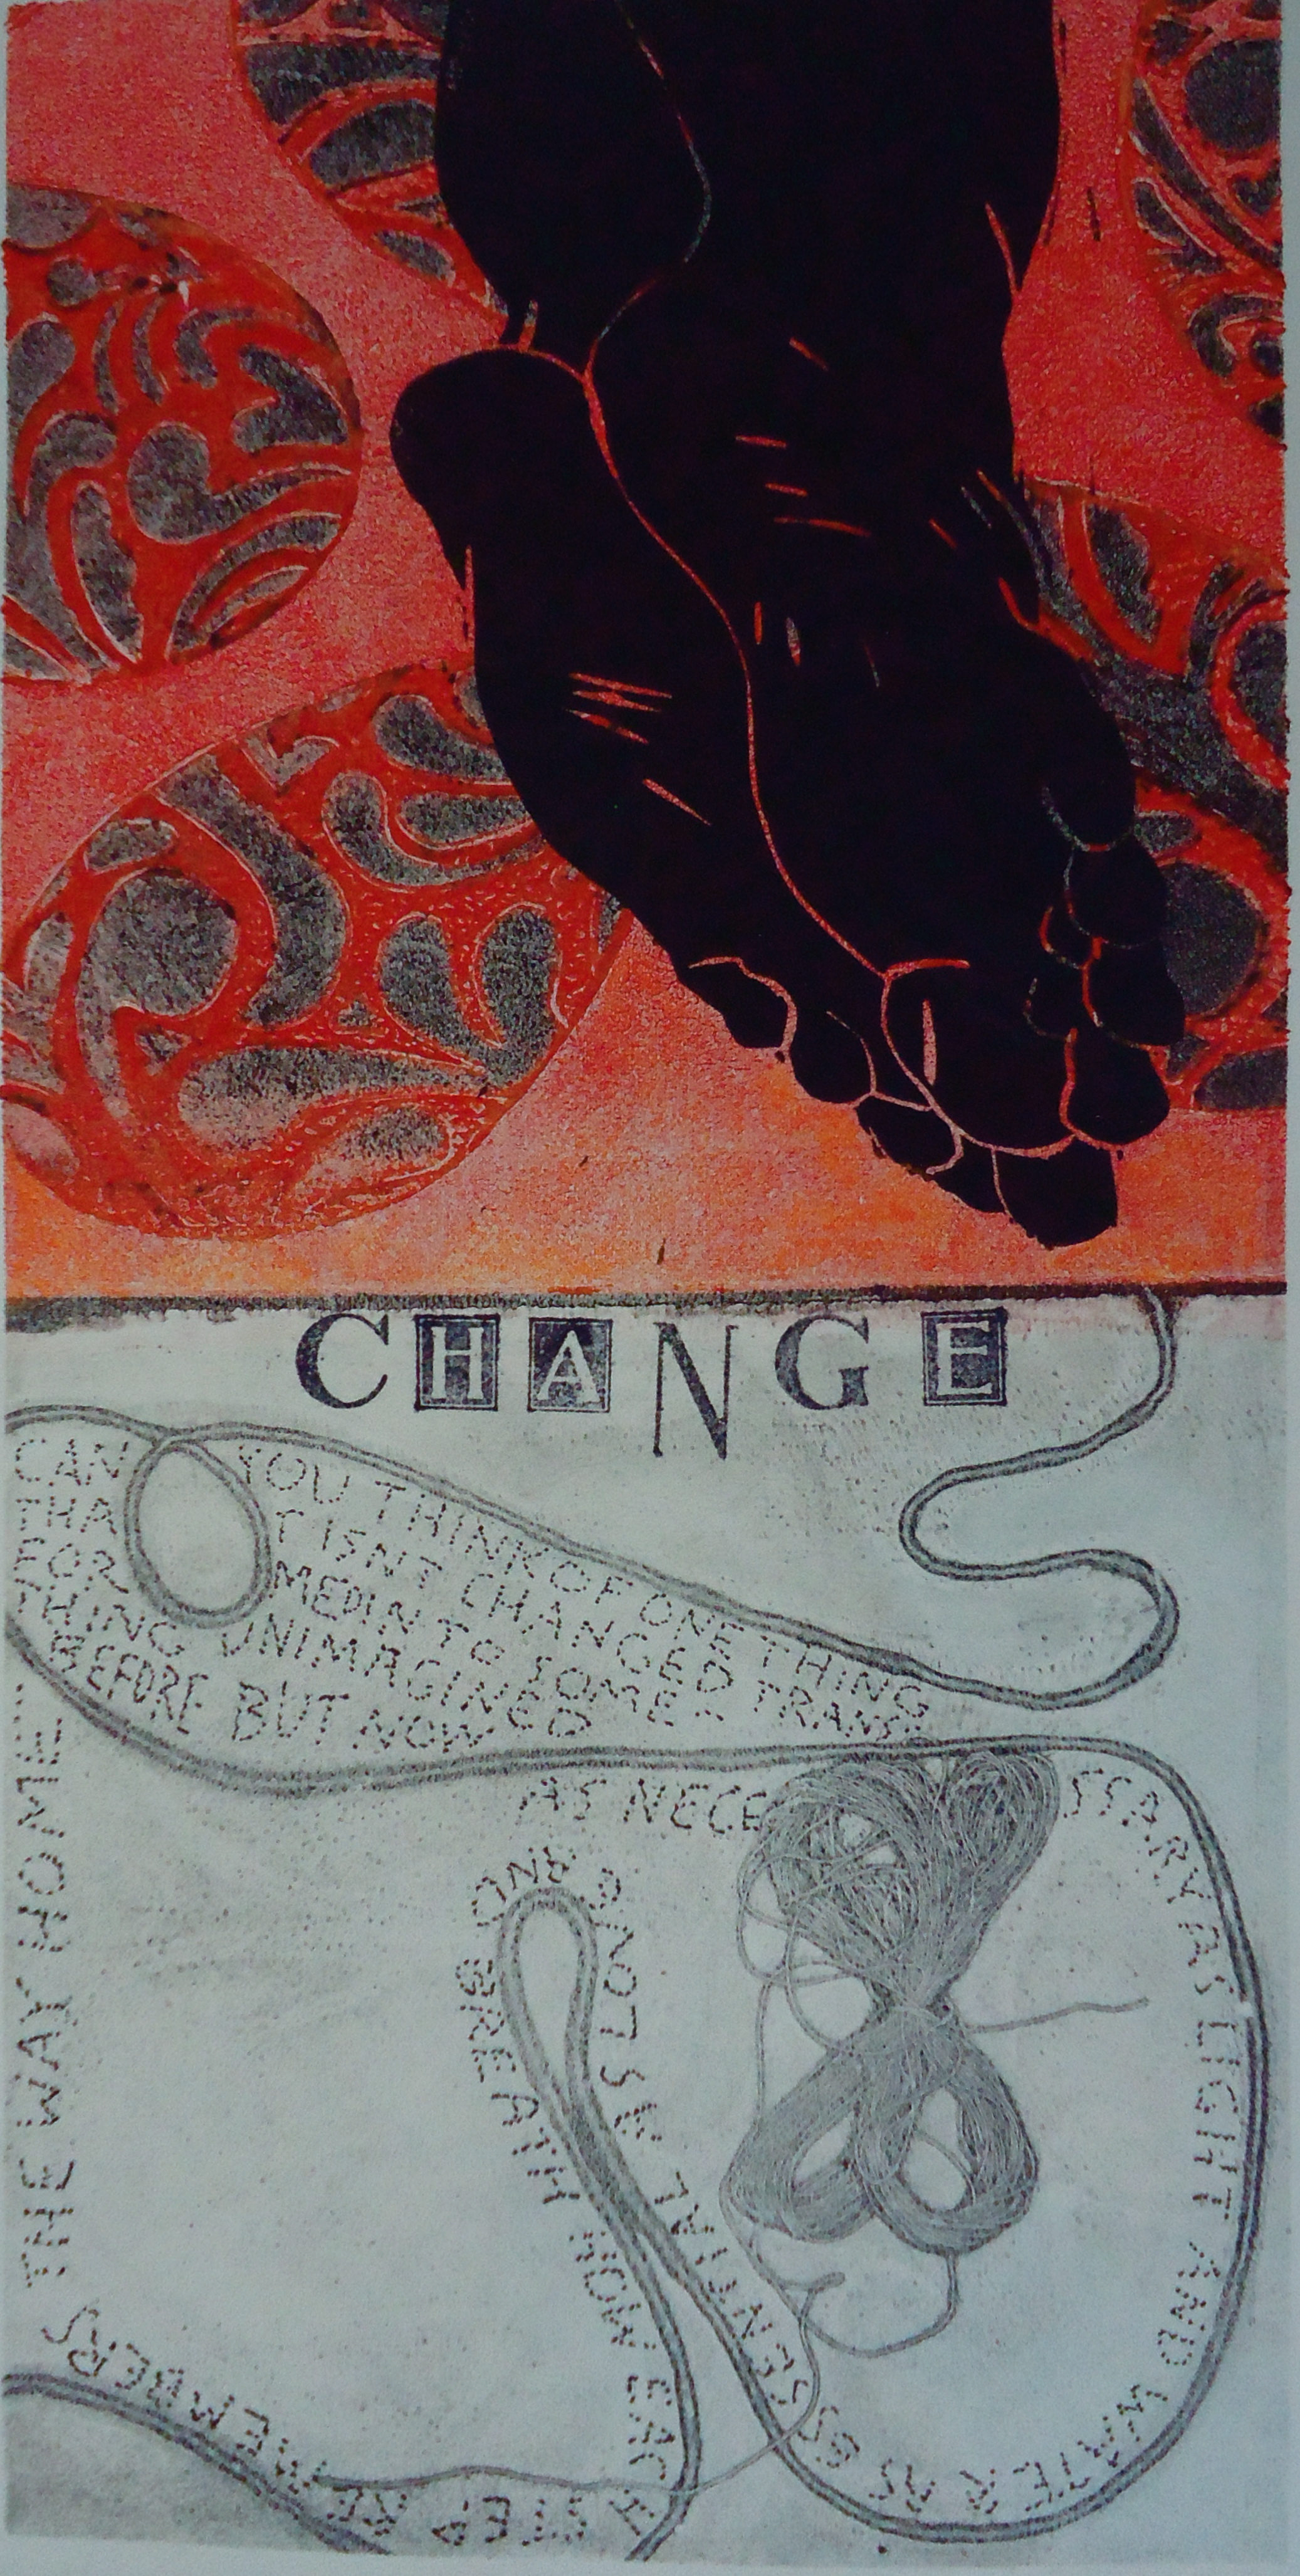   Change   6 x 12 inches  mixed media  image: Susan Webster  hand written and stamped&nbsp;text: Stuart Kestenbaum  2013 